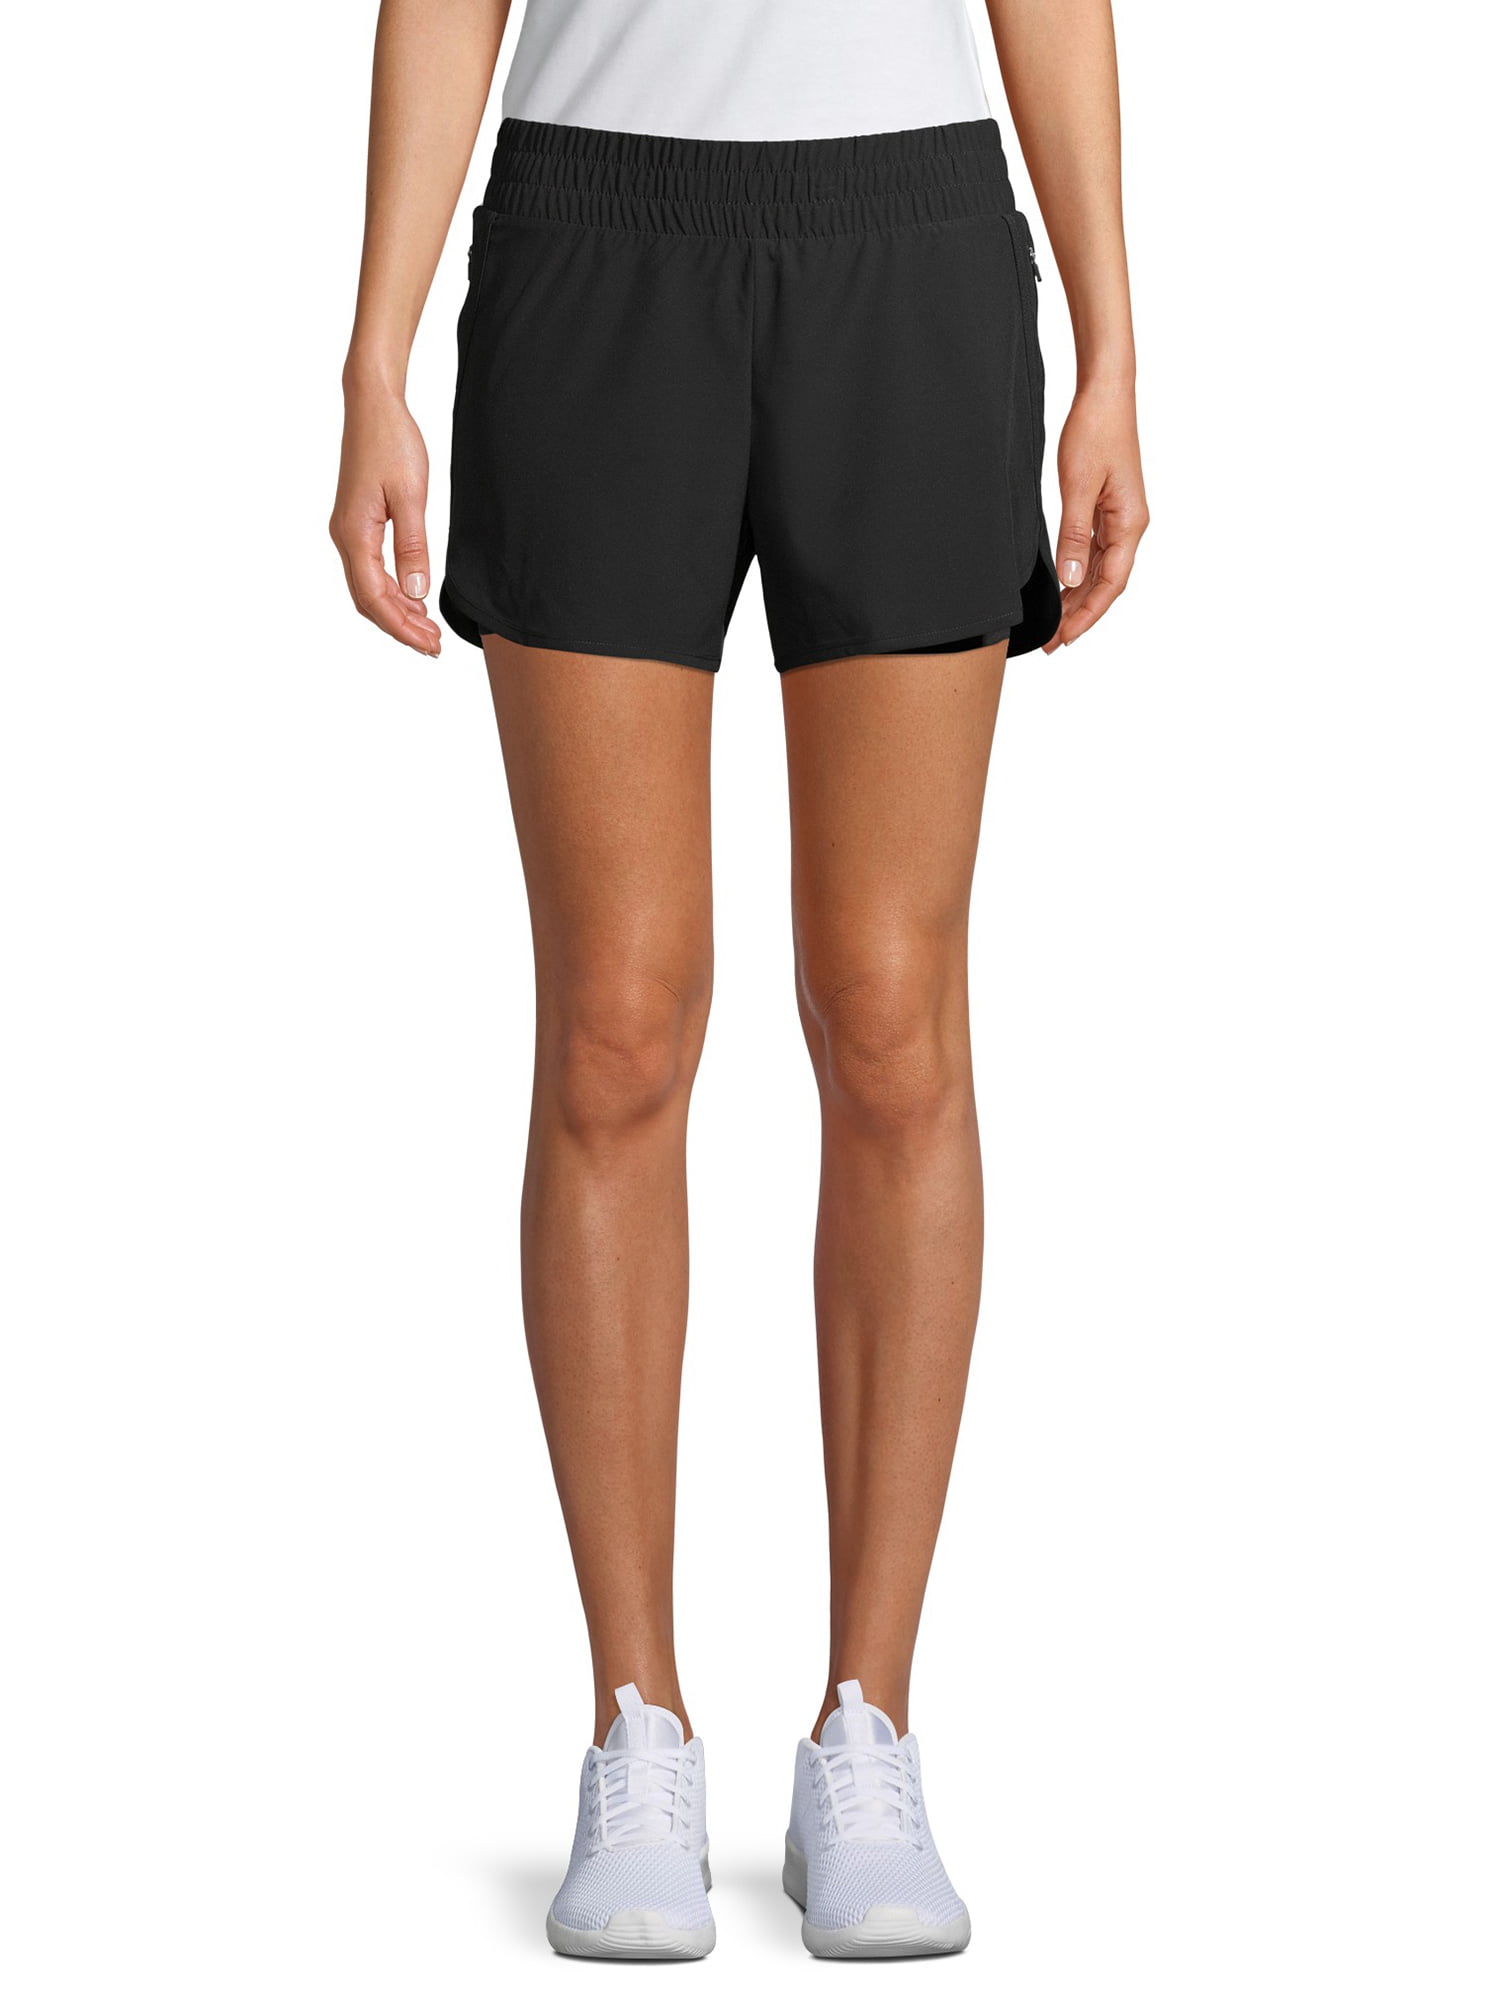 Athletic Works Women's Active Performance Running Shorts with Bike